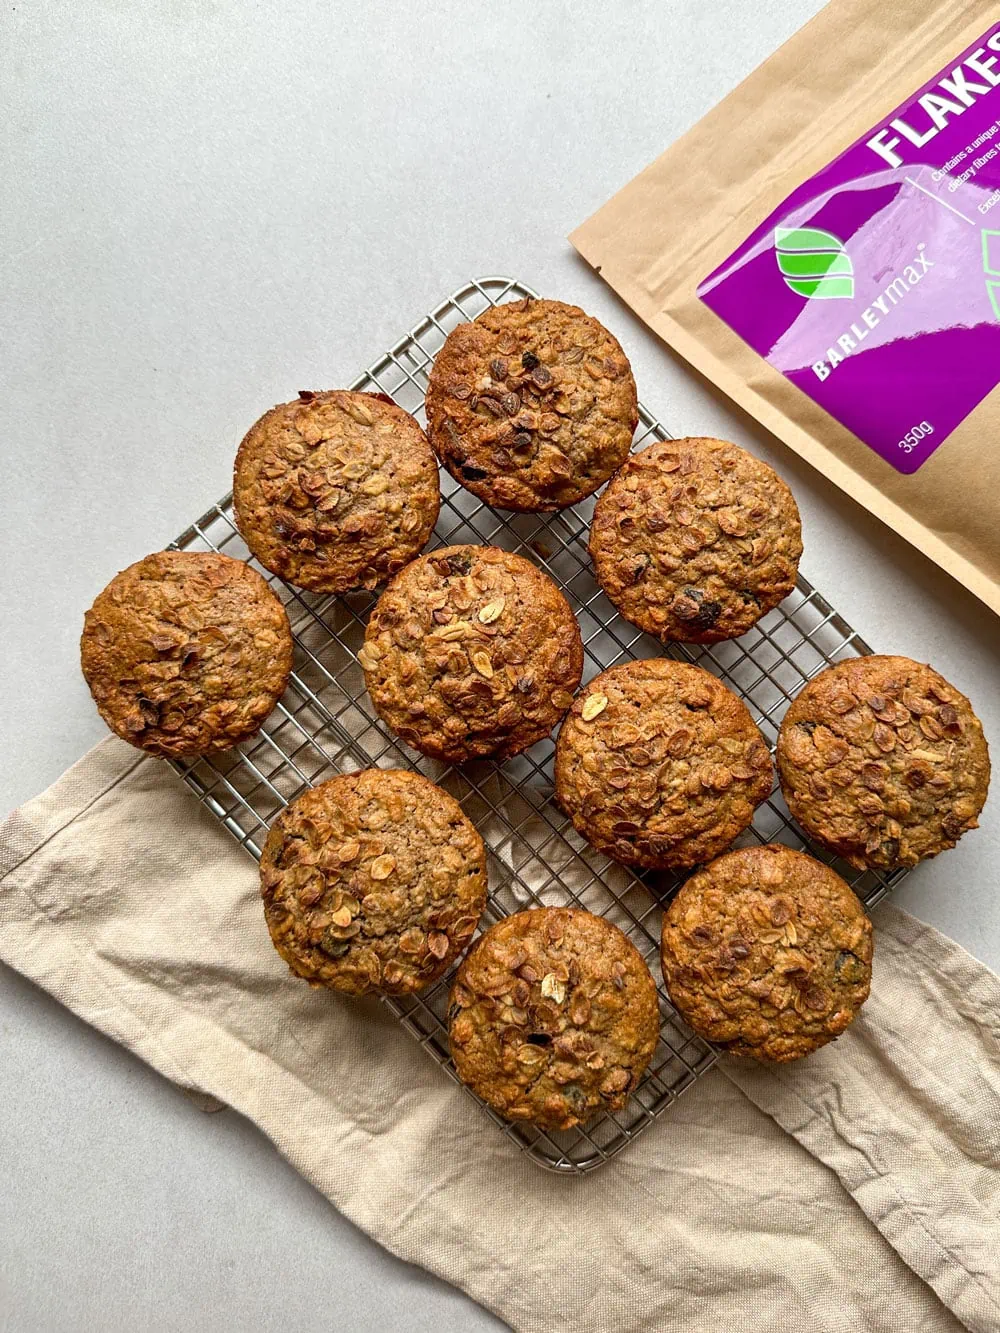 Gut friendly muffins made with BarleyMAX flakes.